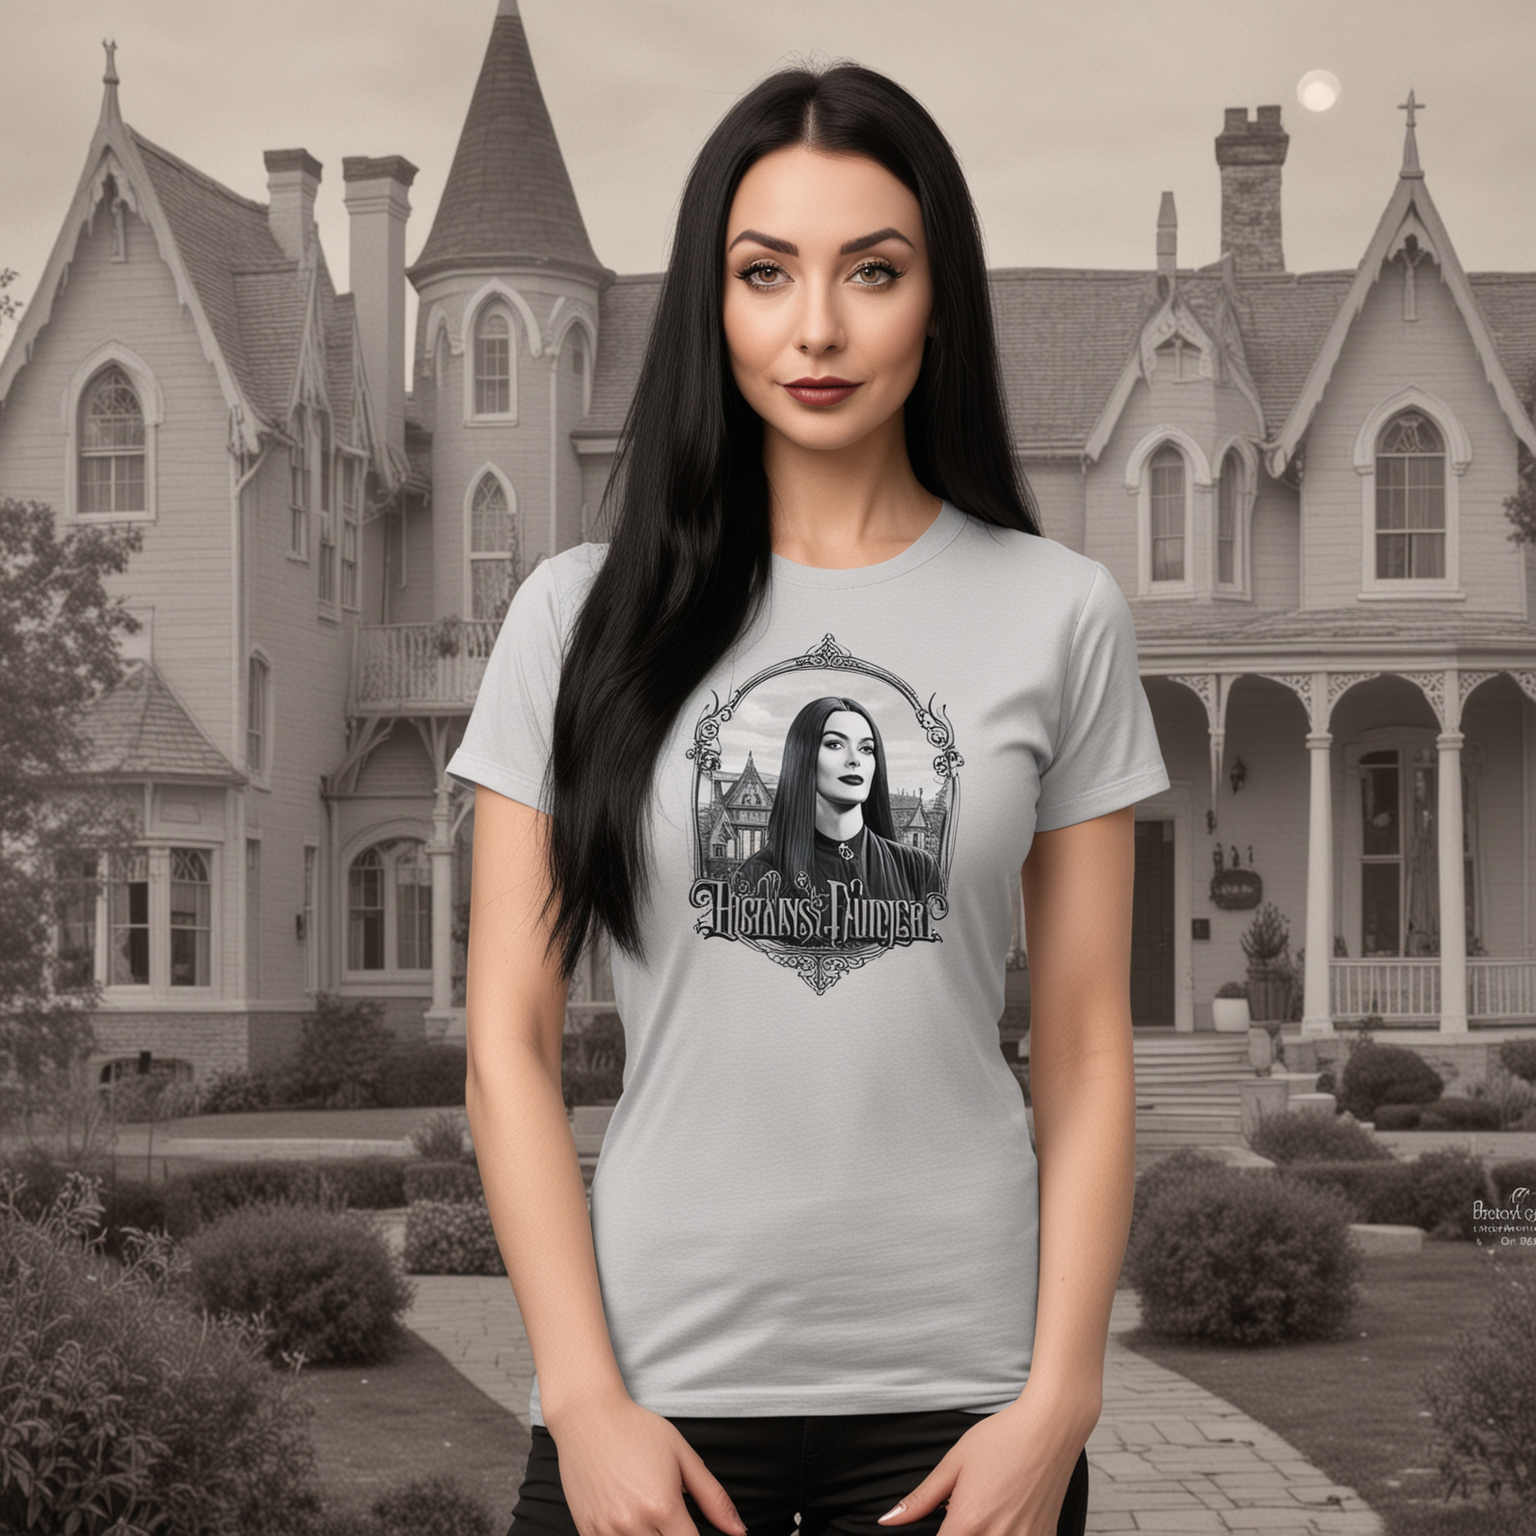 Gothic Femme Fatale Modeling Light Grey ShortSleeved Tee in Addams Family House Setting